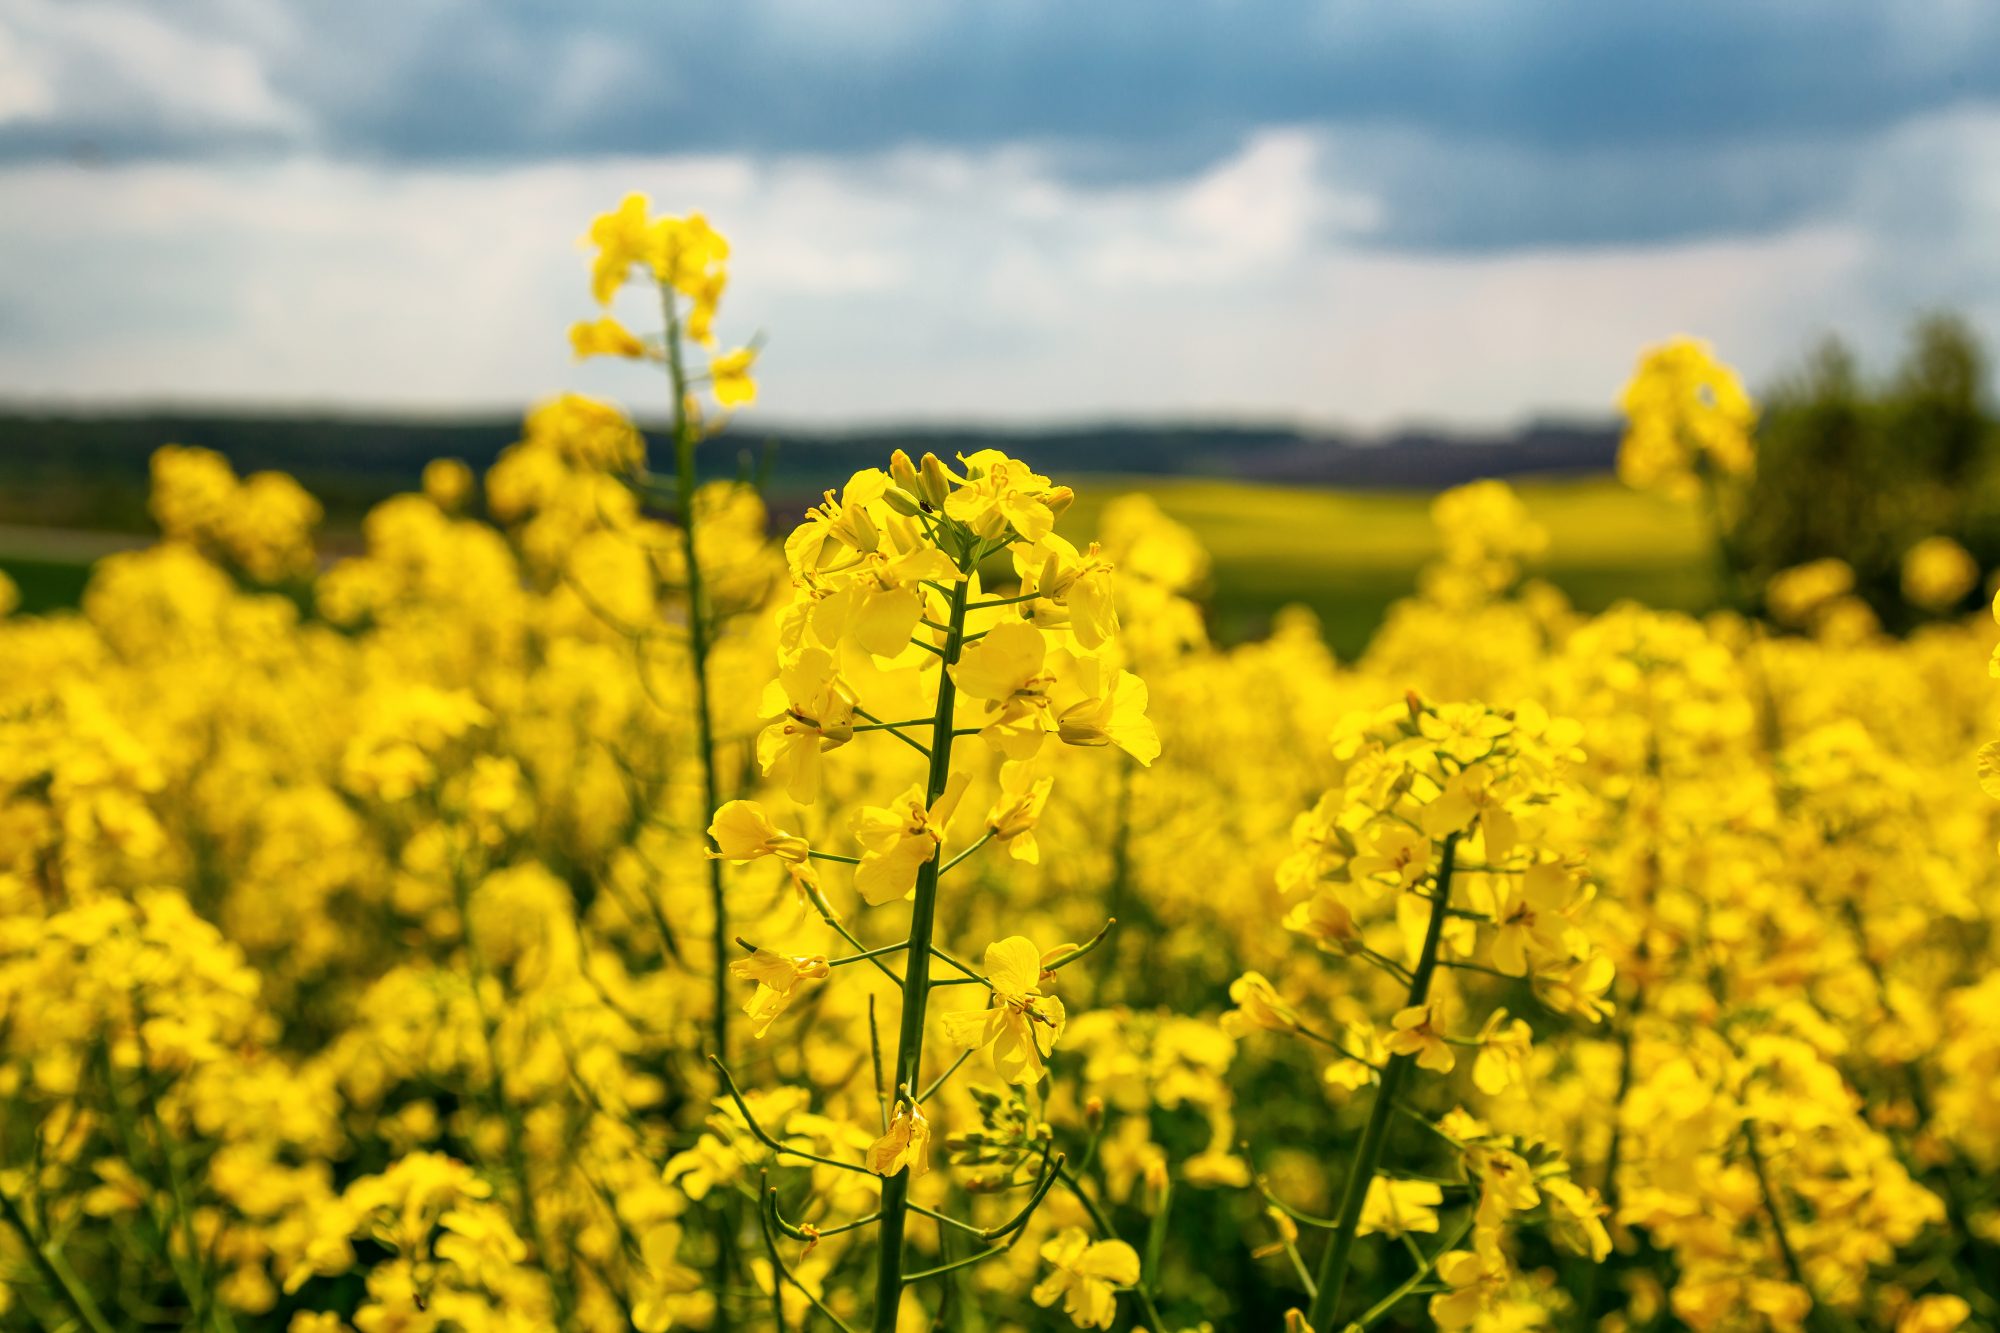 Fields with rapeseed on a sunny day. Rapeseed cultivation